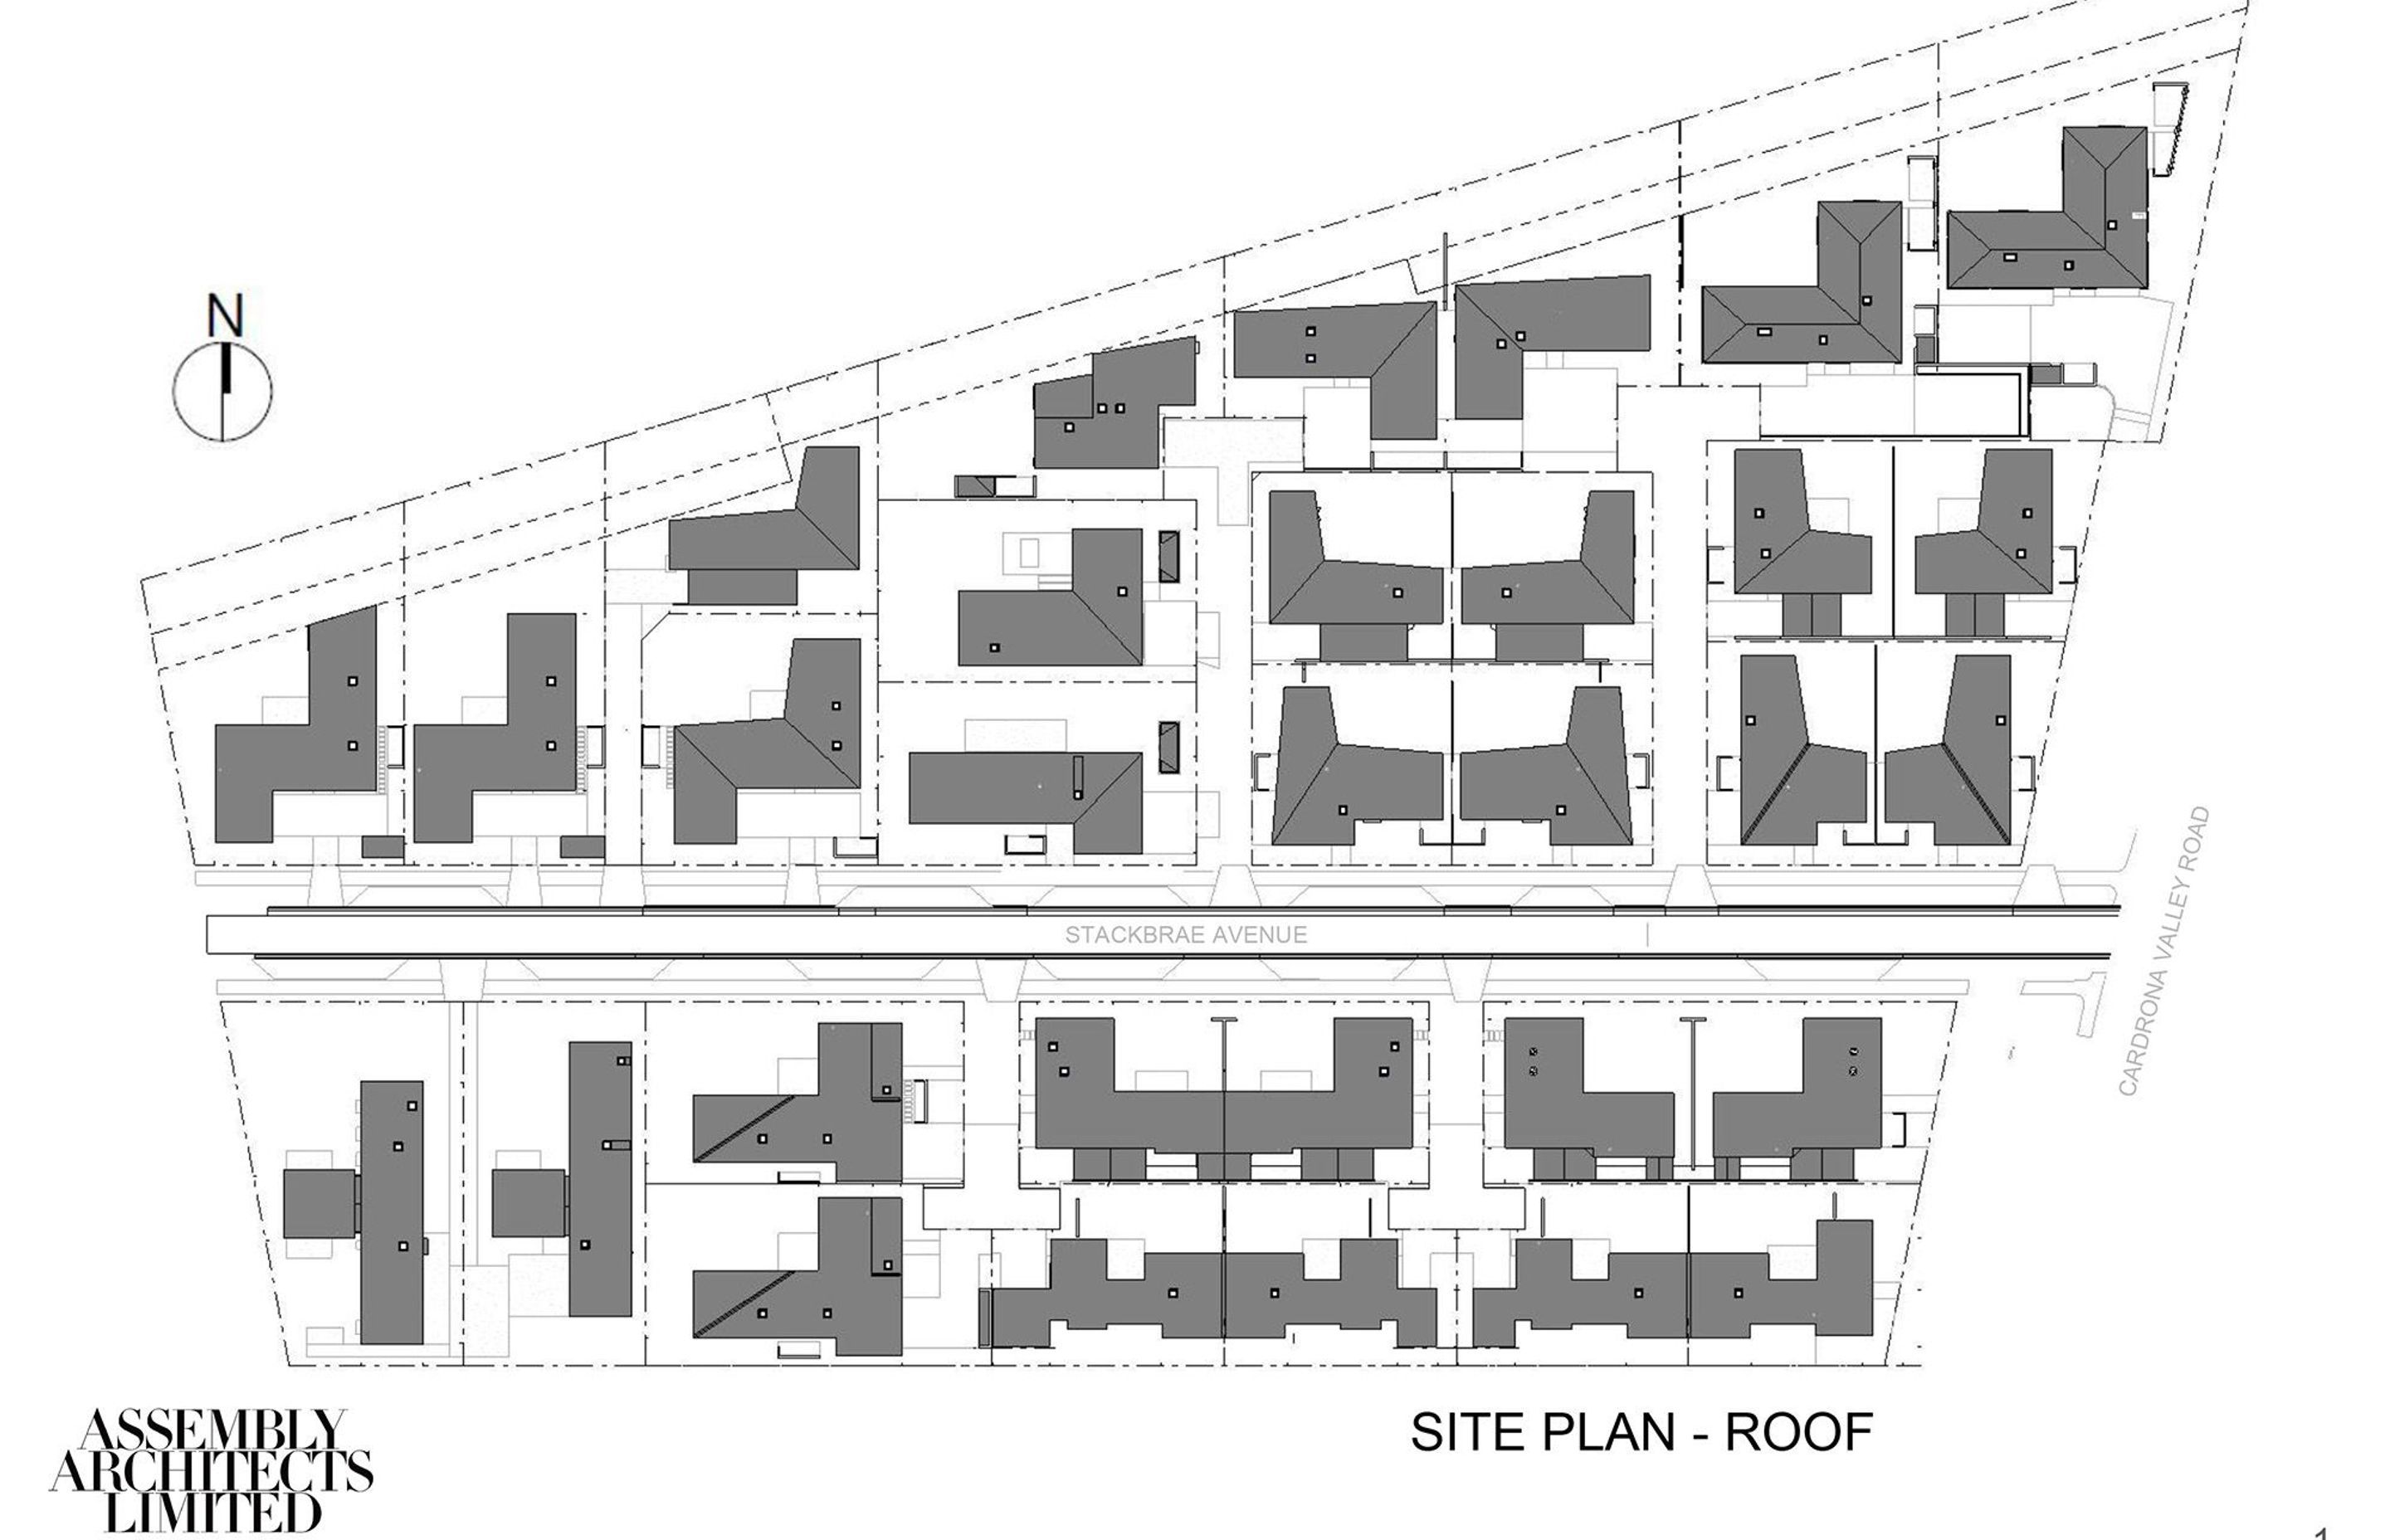 Site plan – roof by Assembly Architects.